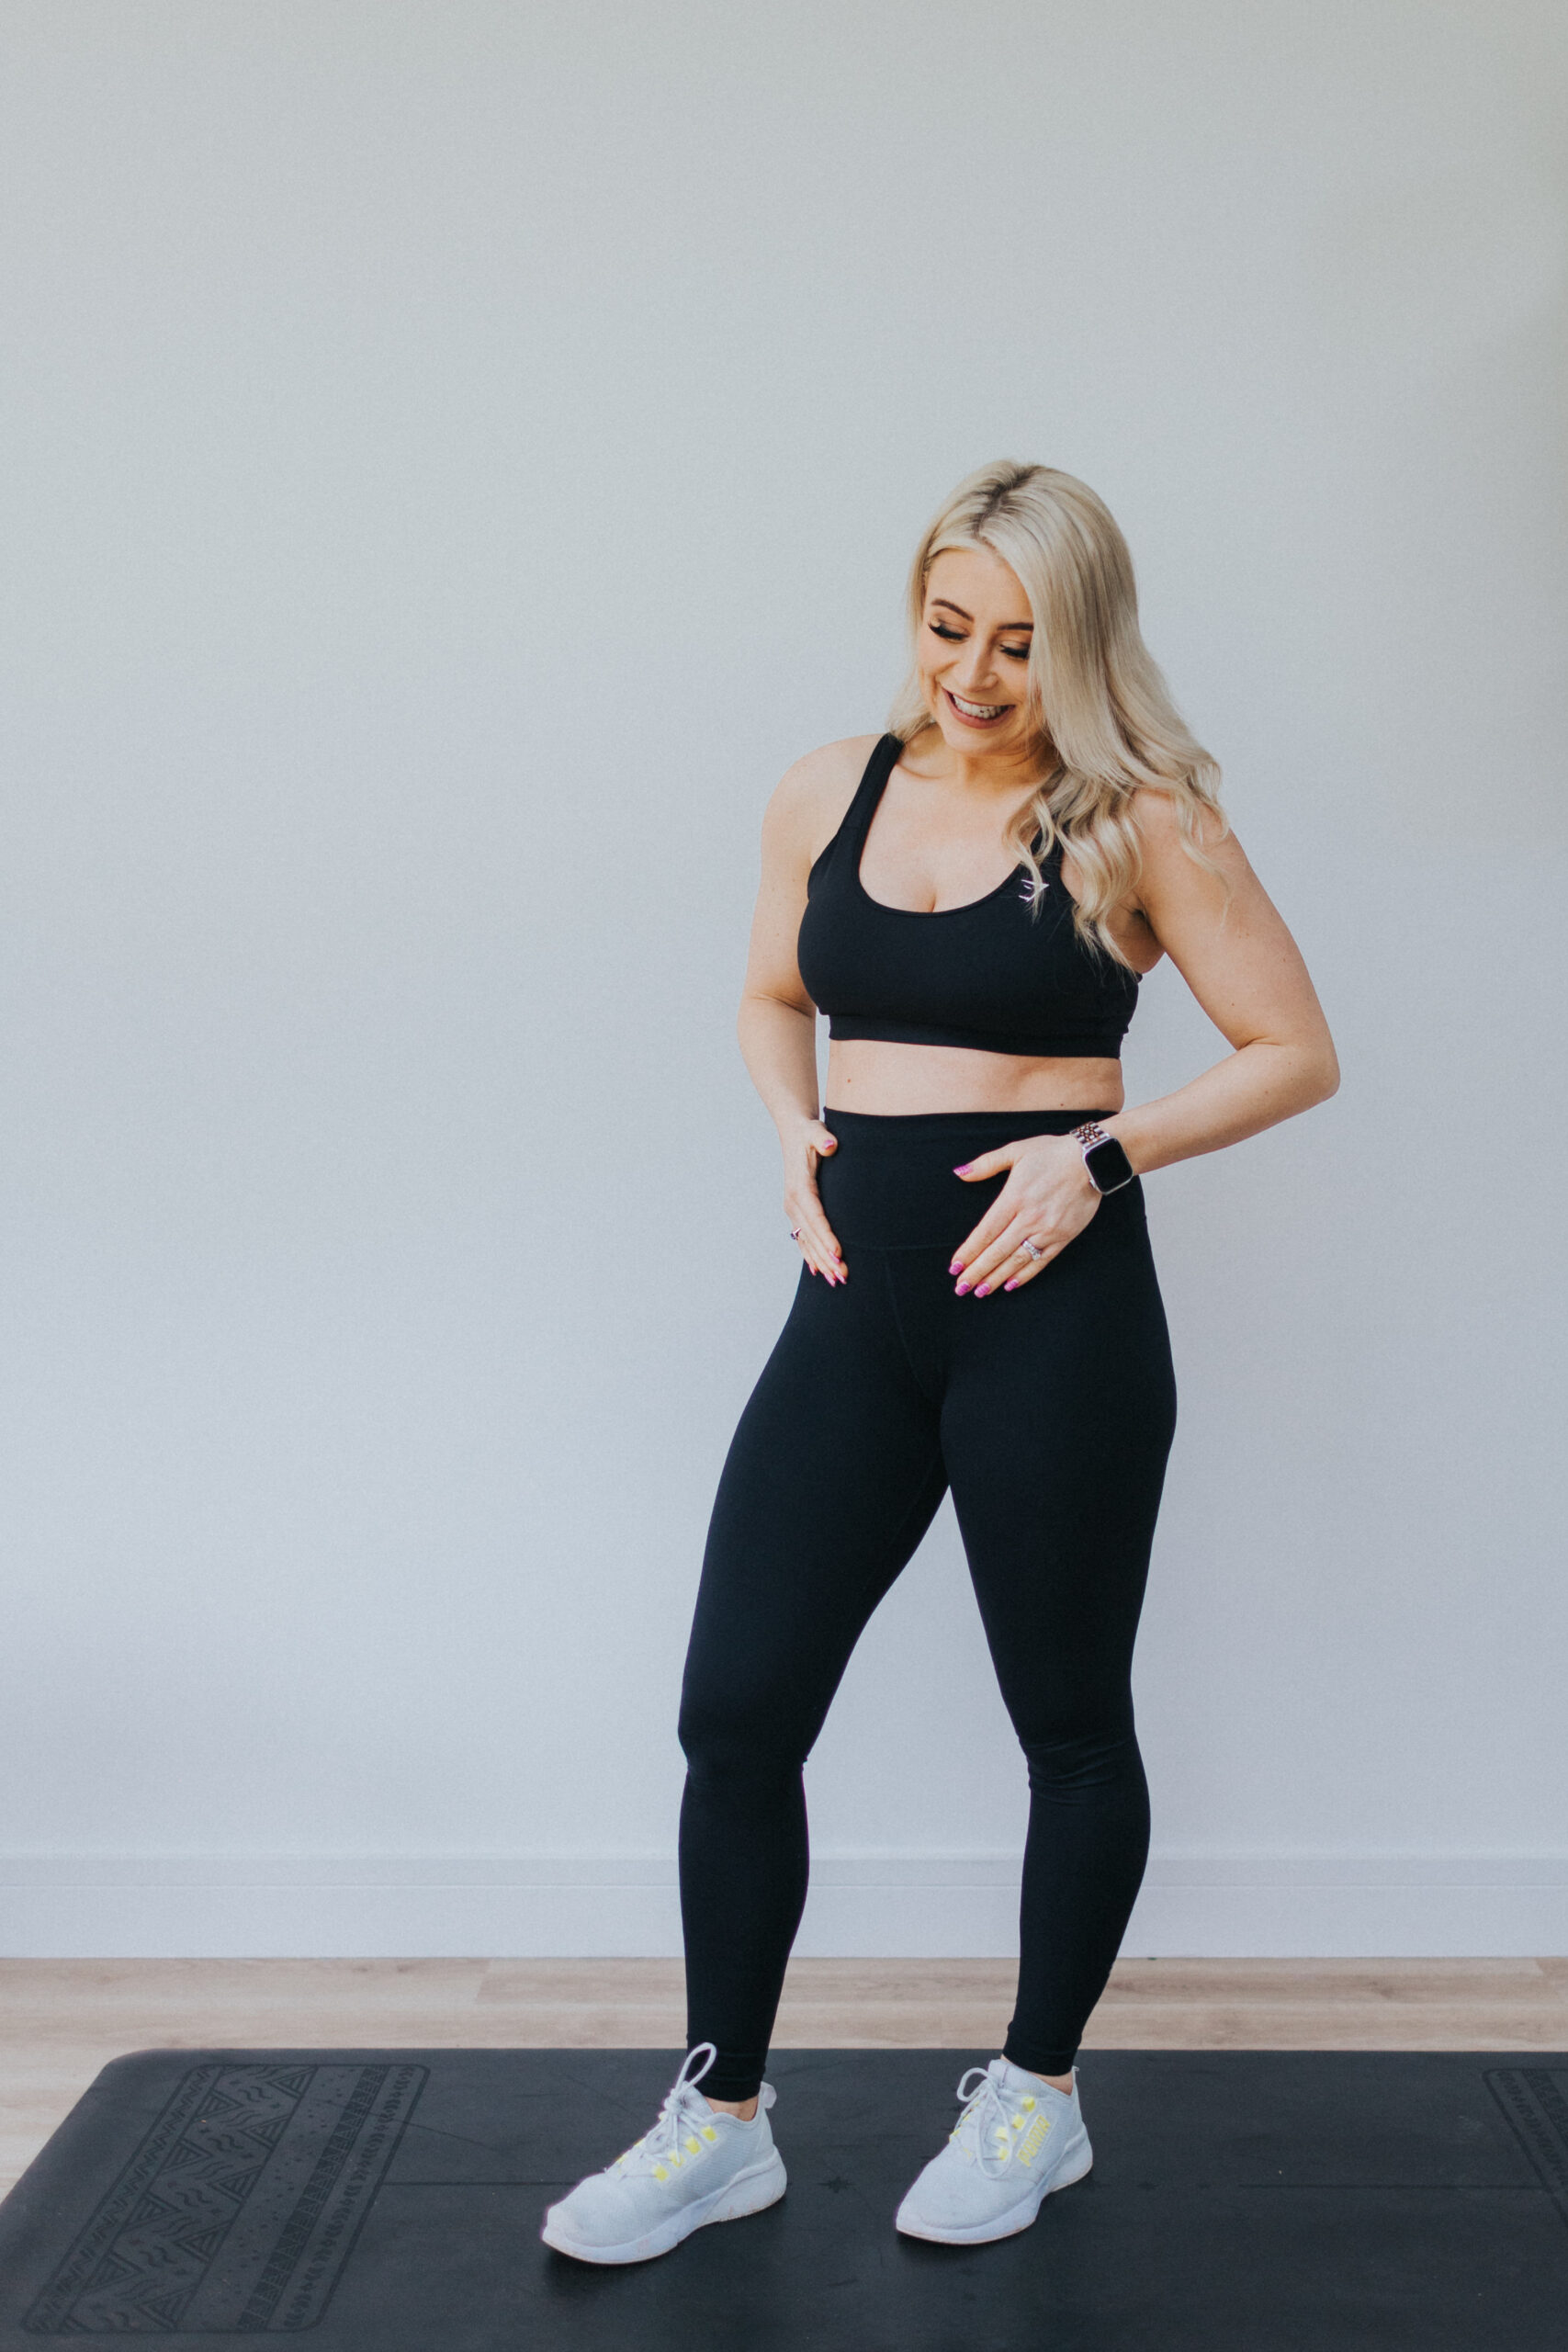 Pre and postnatal training showcased by CharlotteFit